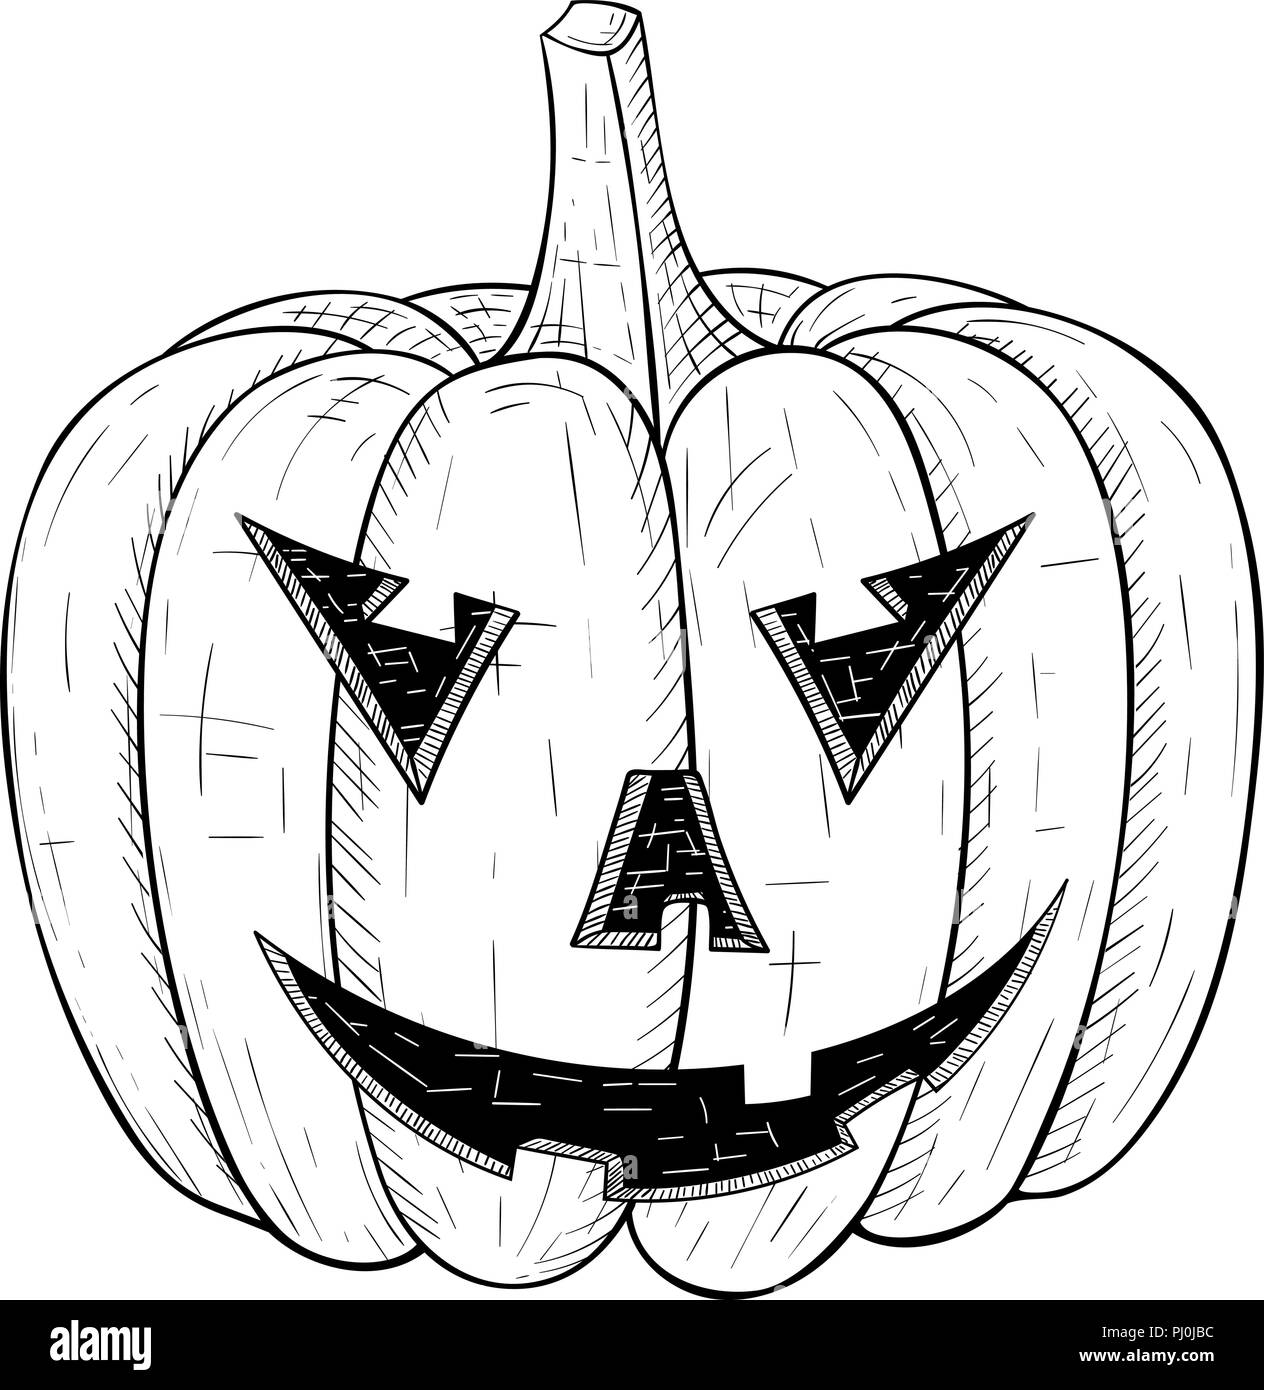 Halloween pumpkin. Carved angry face. Hand drawn sketch Stock Vector